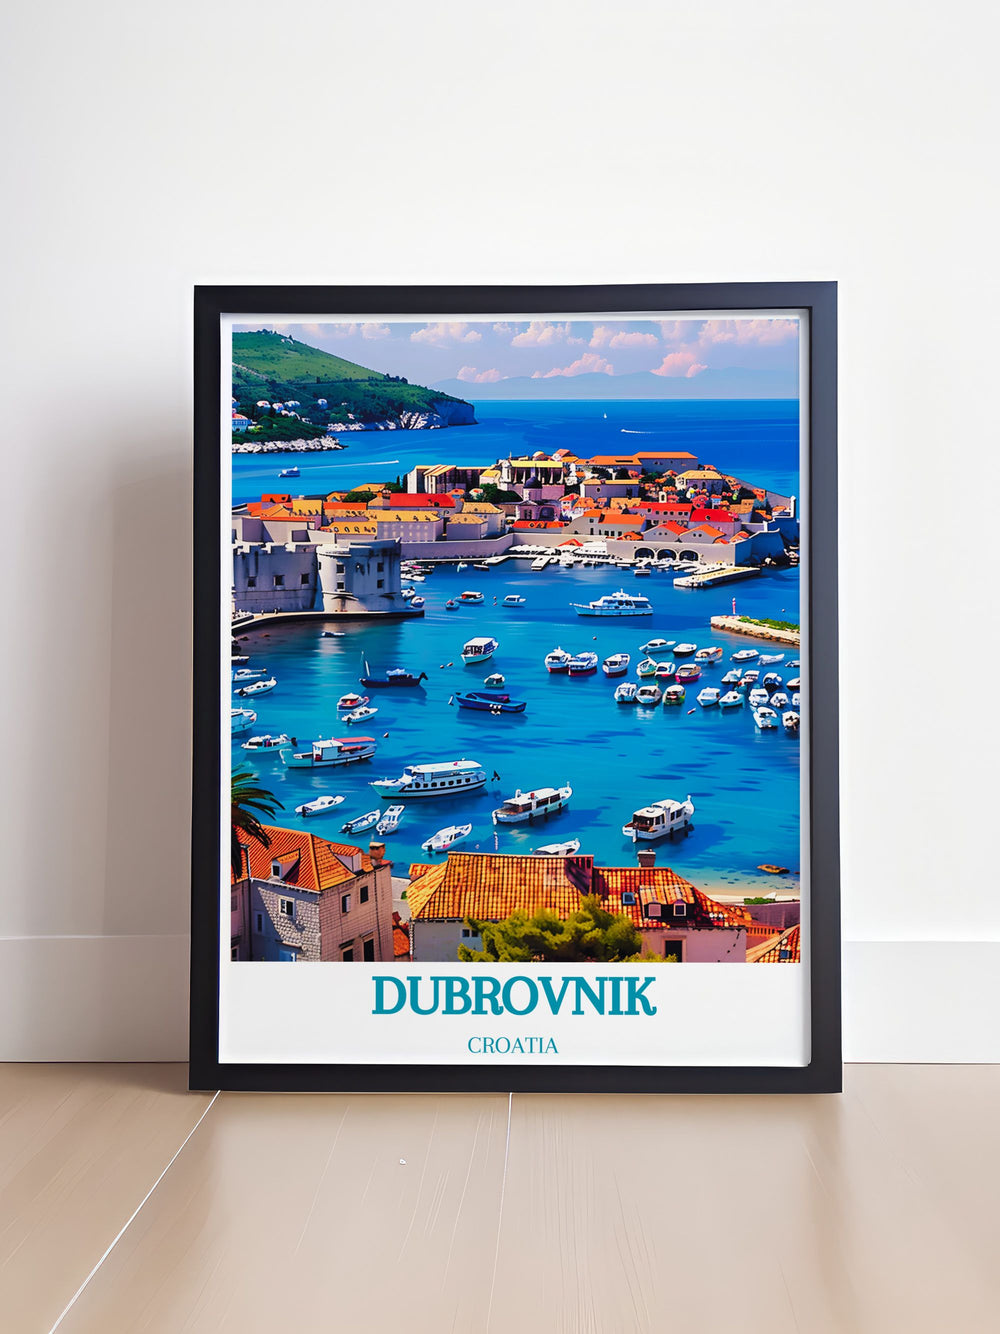 Vintage poster highlighting Dubrovniks historical charm, featuring the Old Town Harbor and its scenic coastal views.